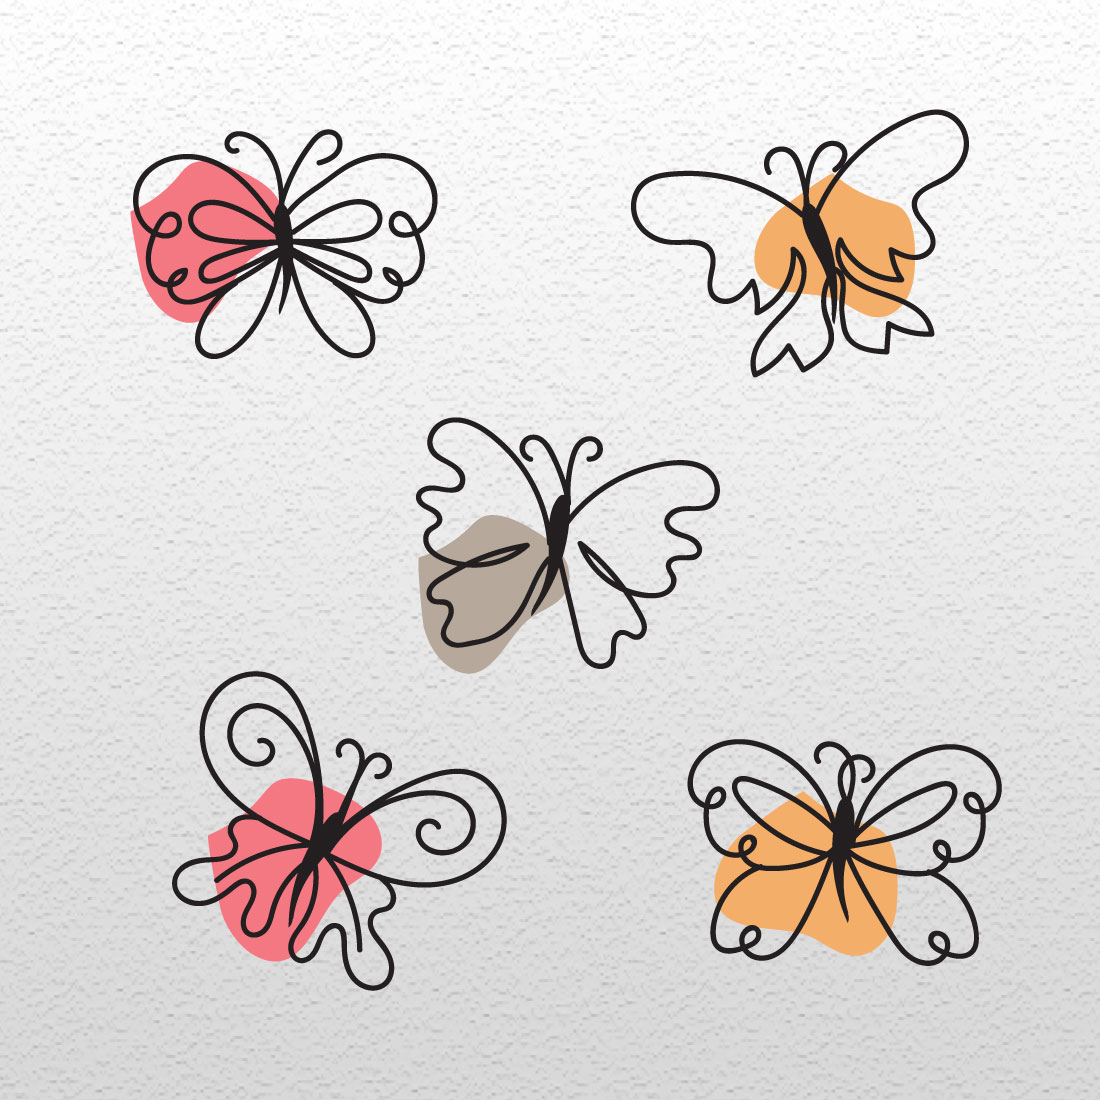 Four different colored butterflies on a white background.